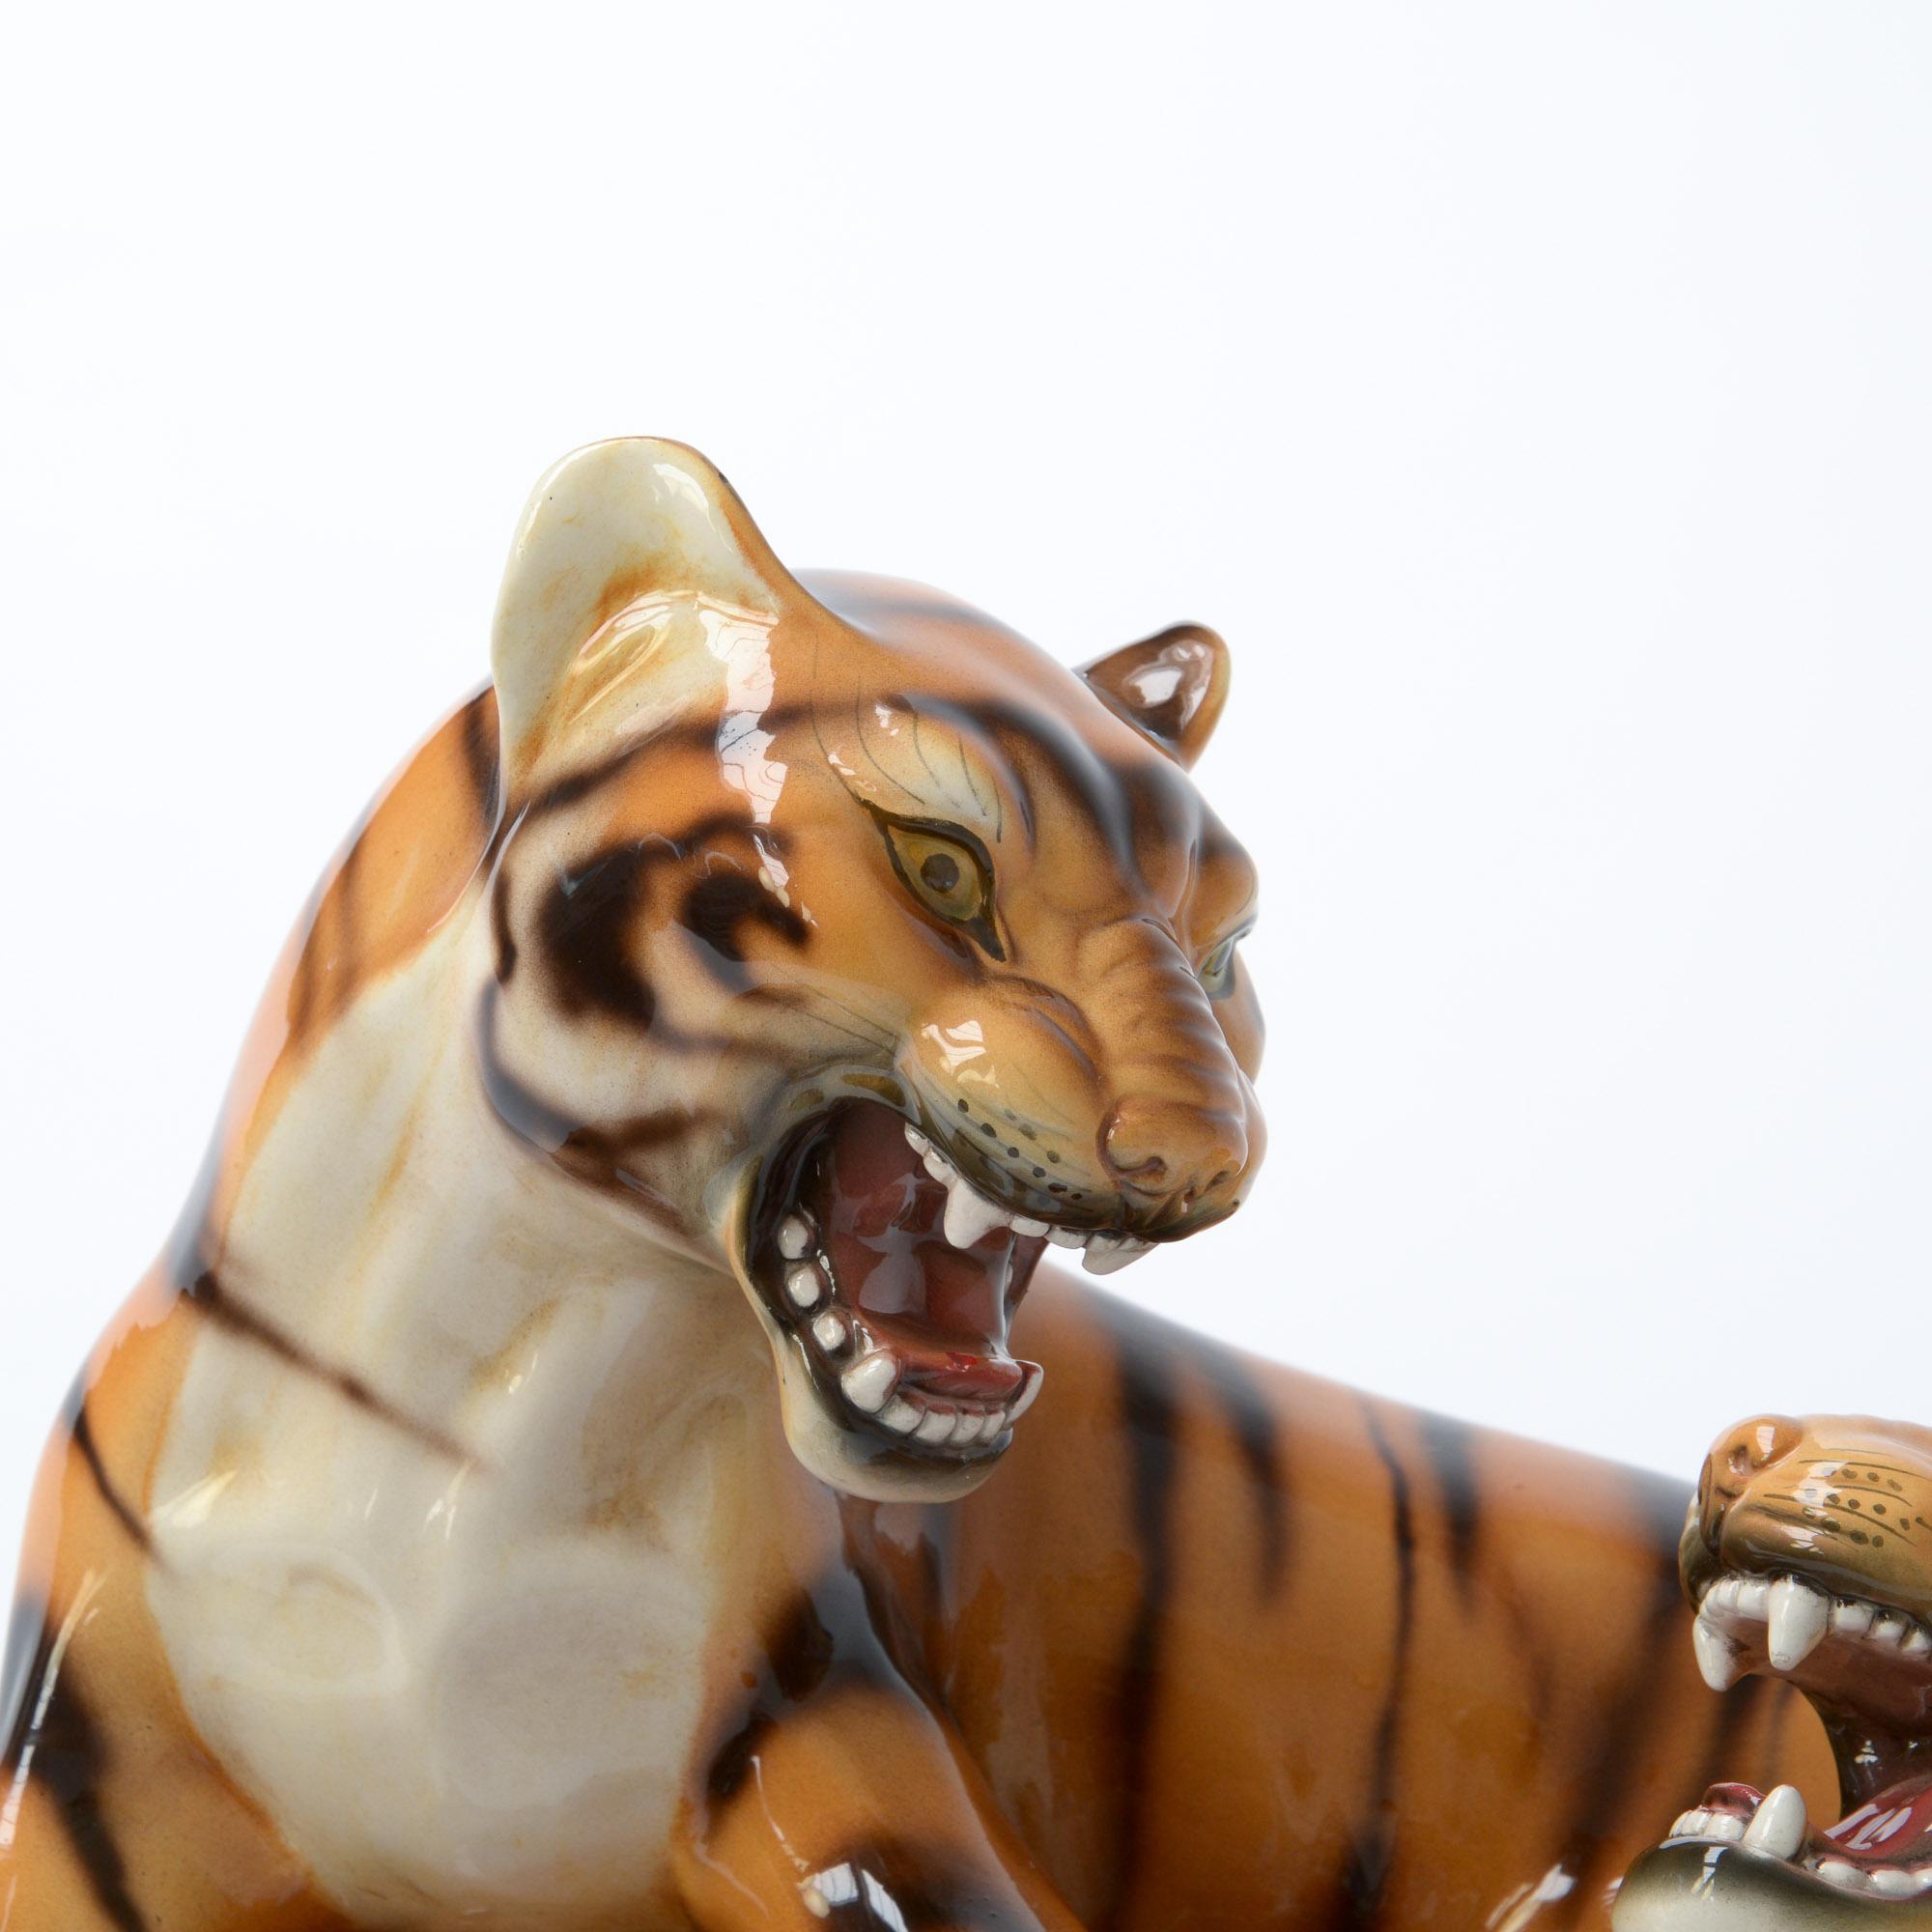 Italian Porcelain Sculpture of Playing Tigers by Ronzan, Italy